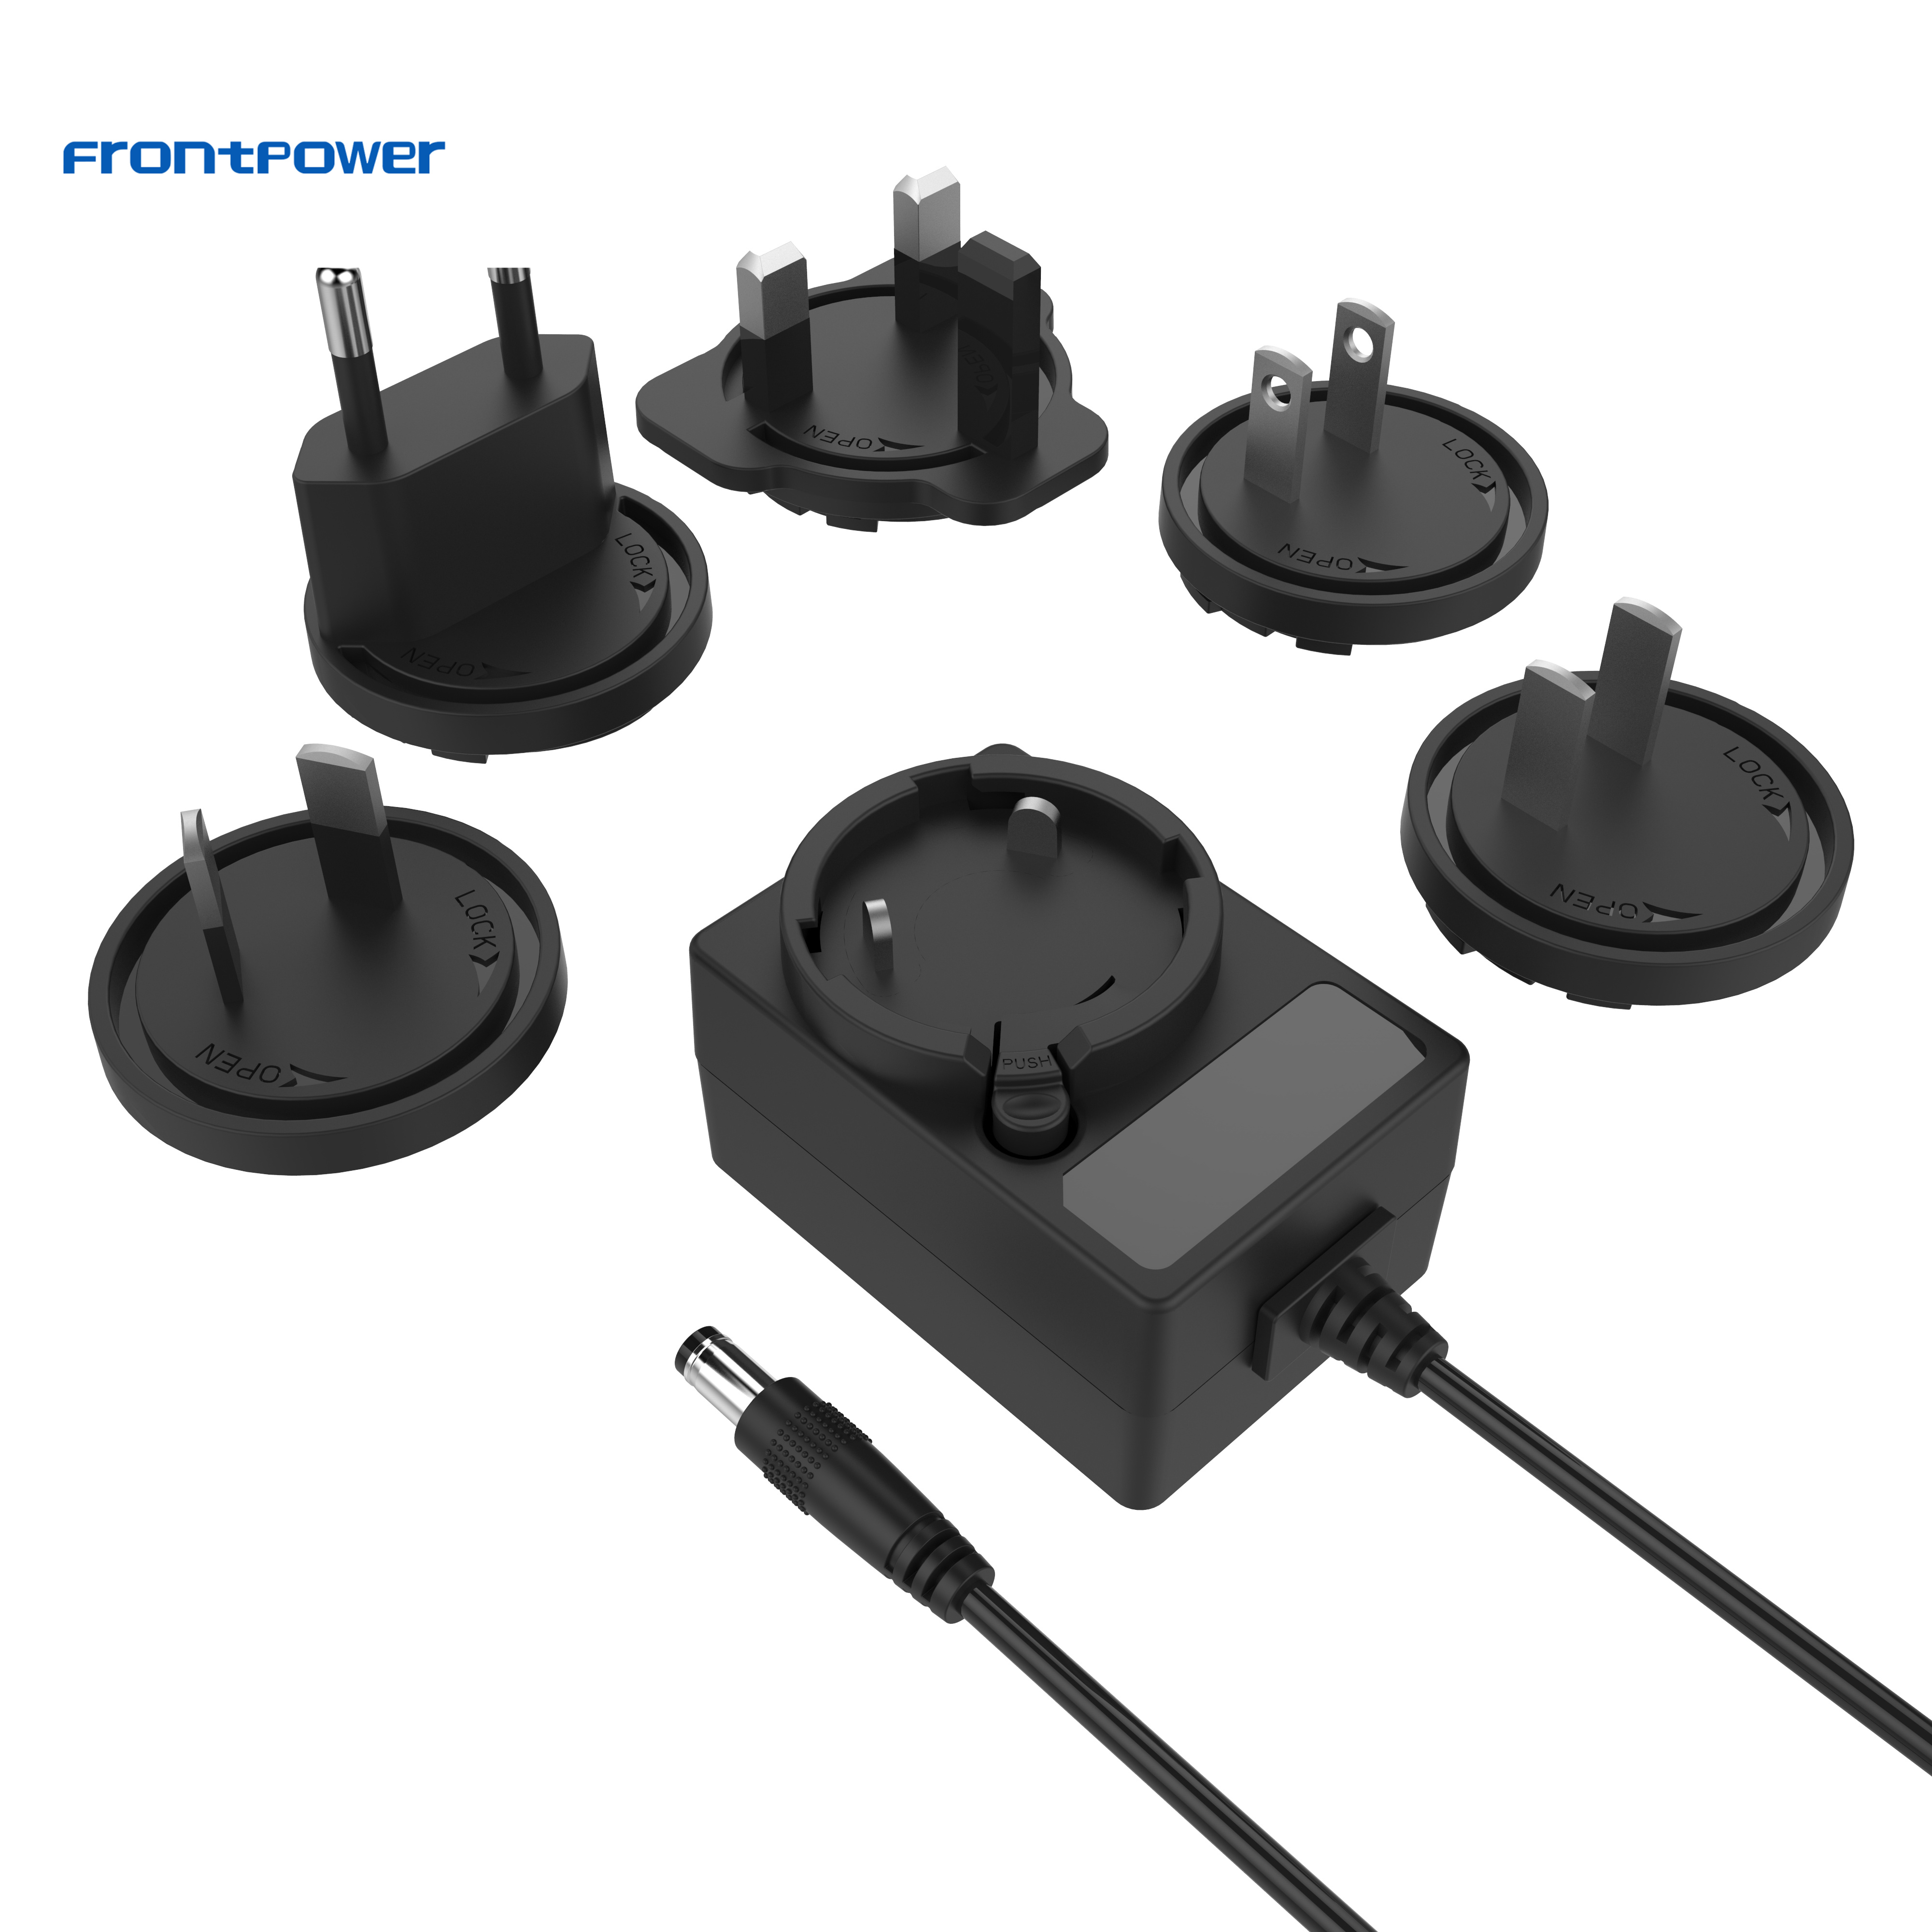 power supply 5V 2A 1A 2.5A 3A interchangeable plug power adapter with UL ECAS CE GS BIS SAA UKCA CB KC PSE CCC certs